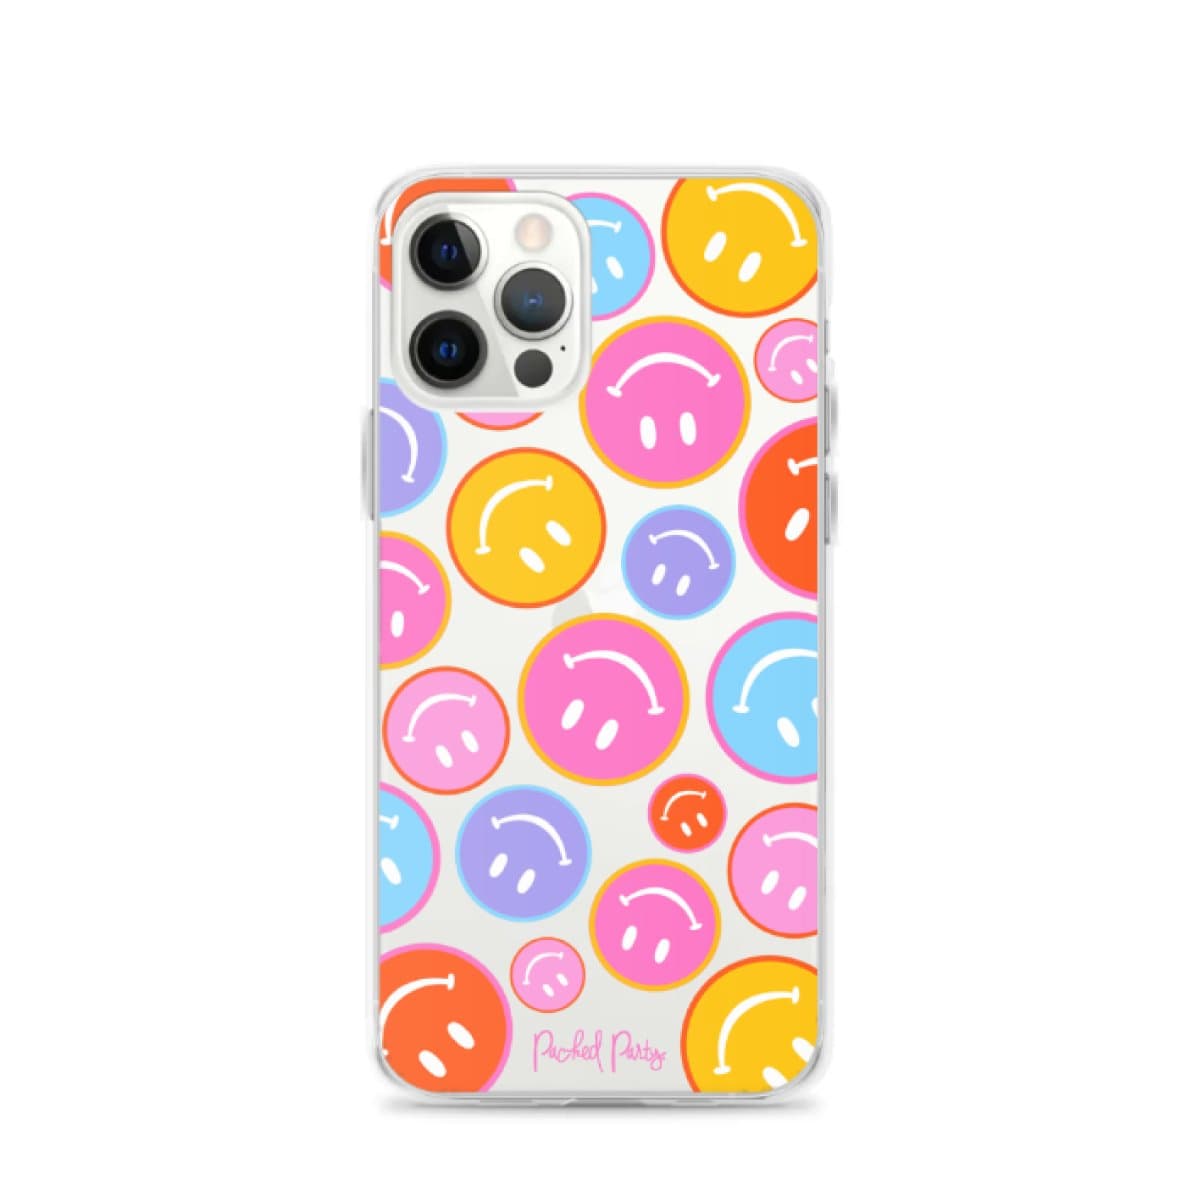 Smiles All Around Smiley Face Phone Case | Packed Party